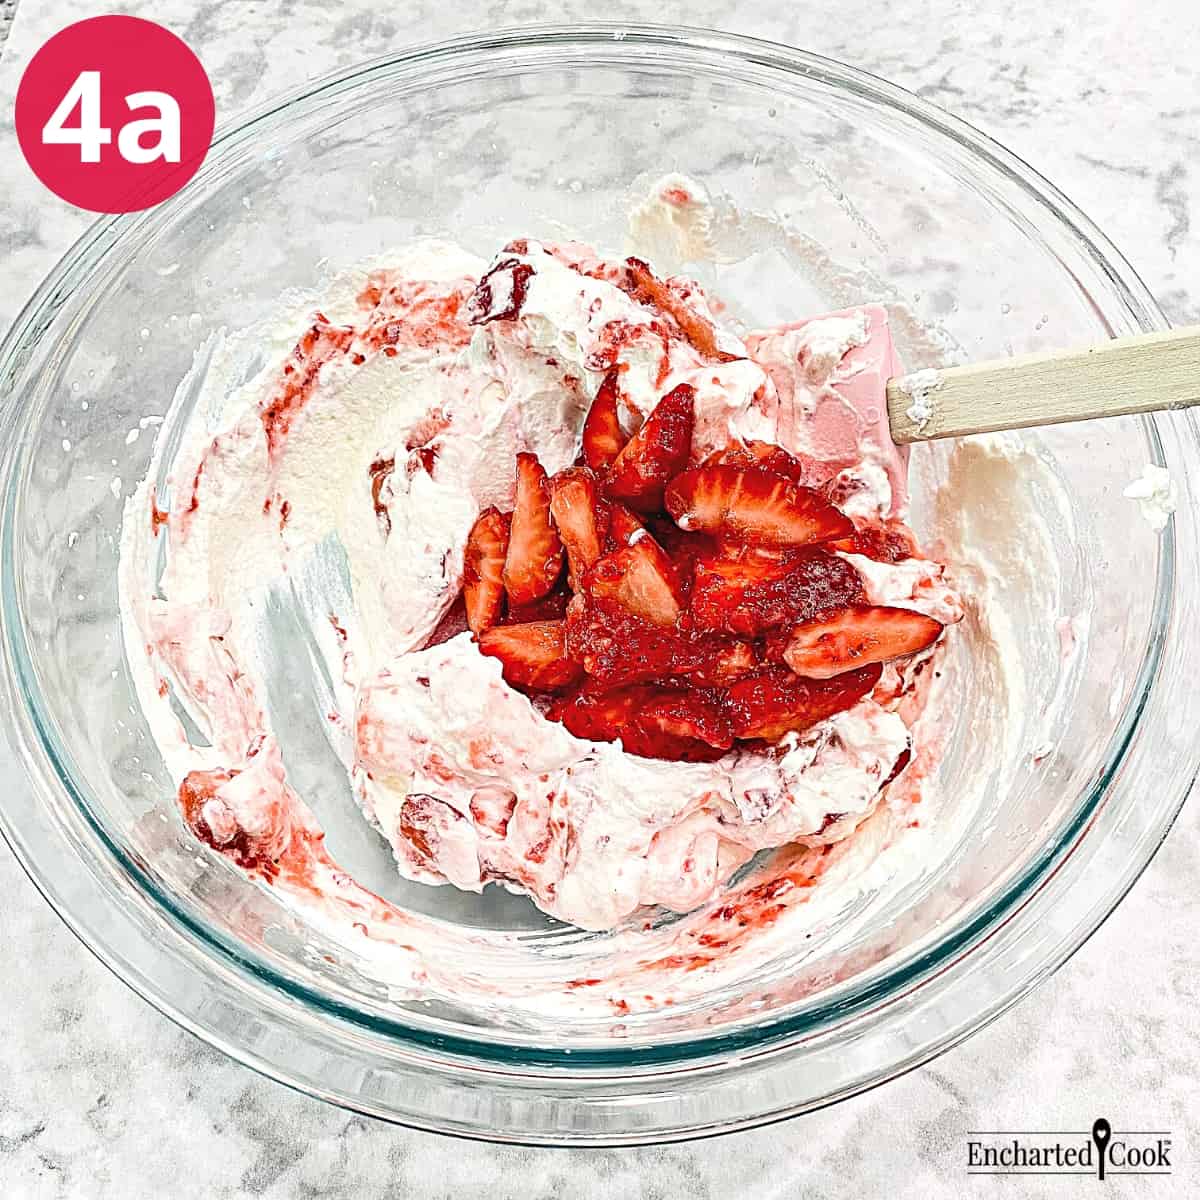 Process Photo 4a - The strawberry mixture is gradually folded into the whipped cream.